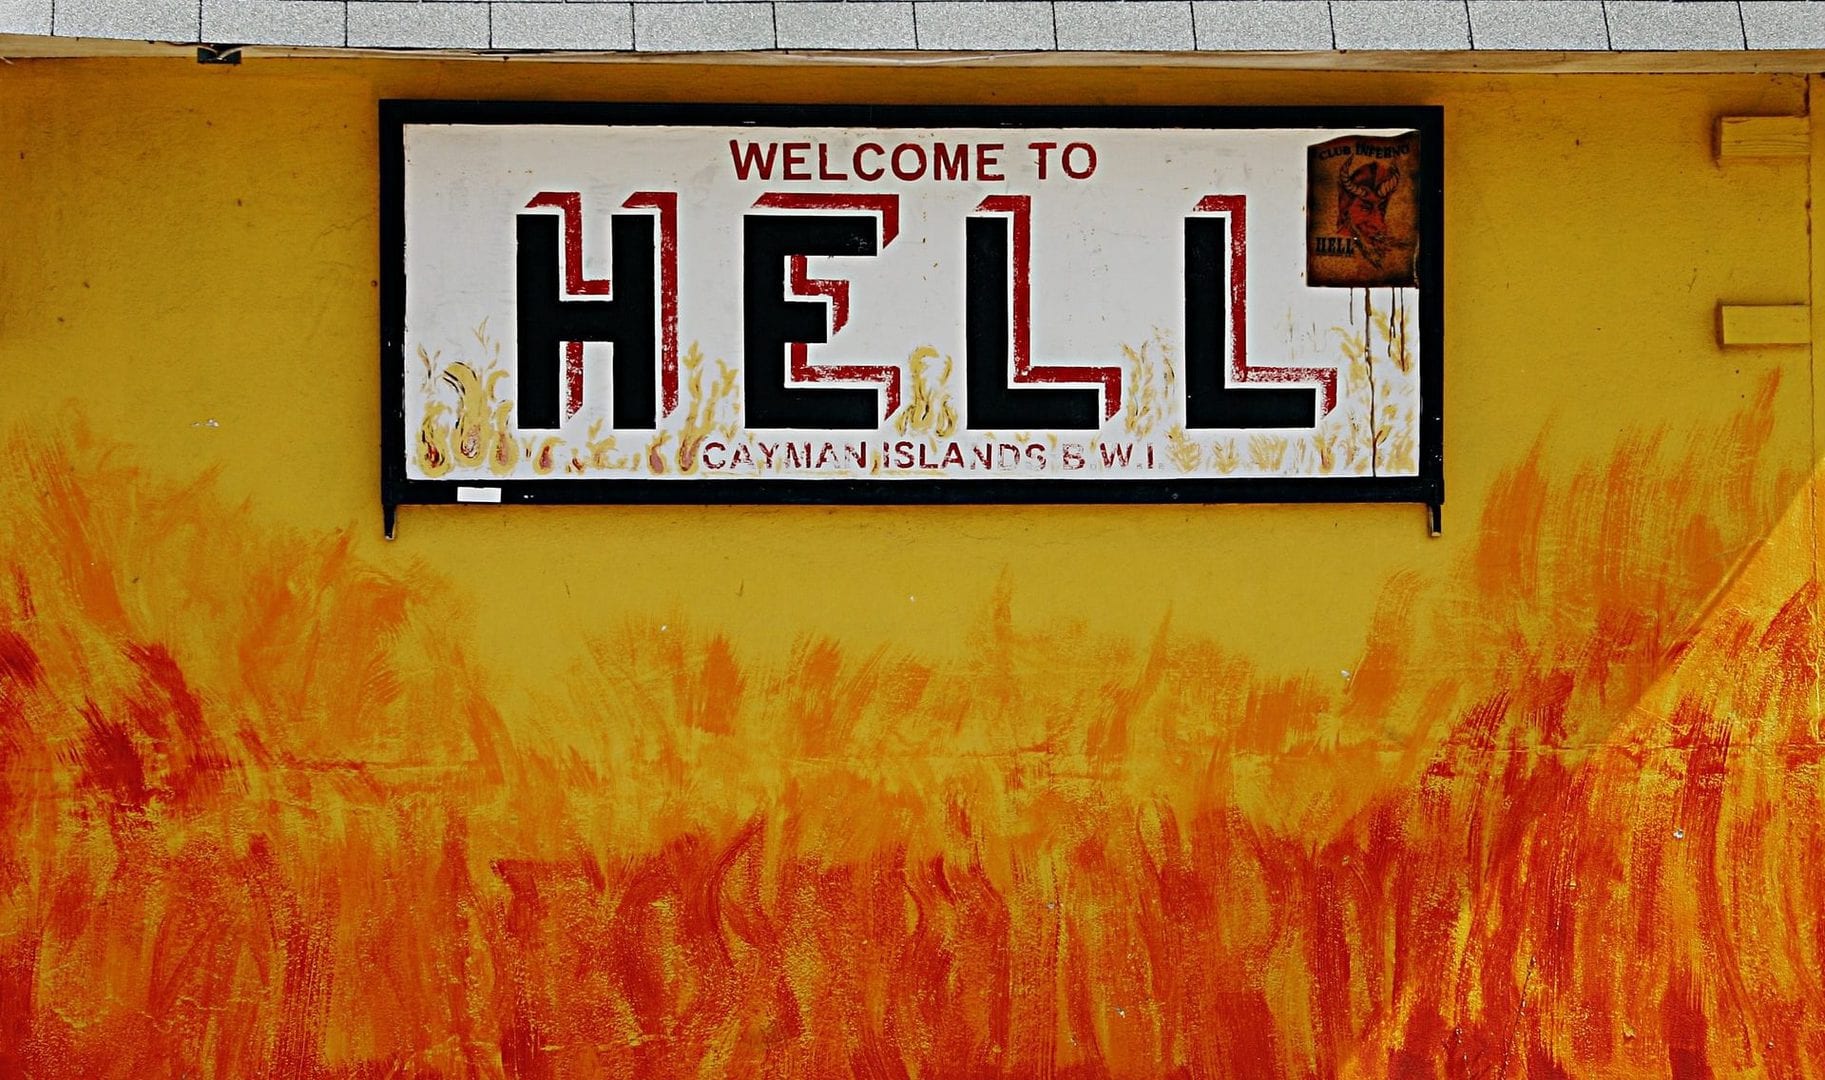 What if Jesus is sending Christians straight to hell?